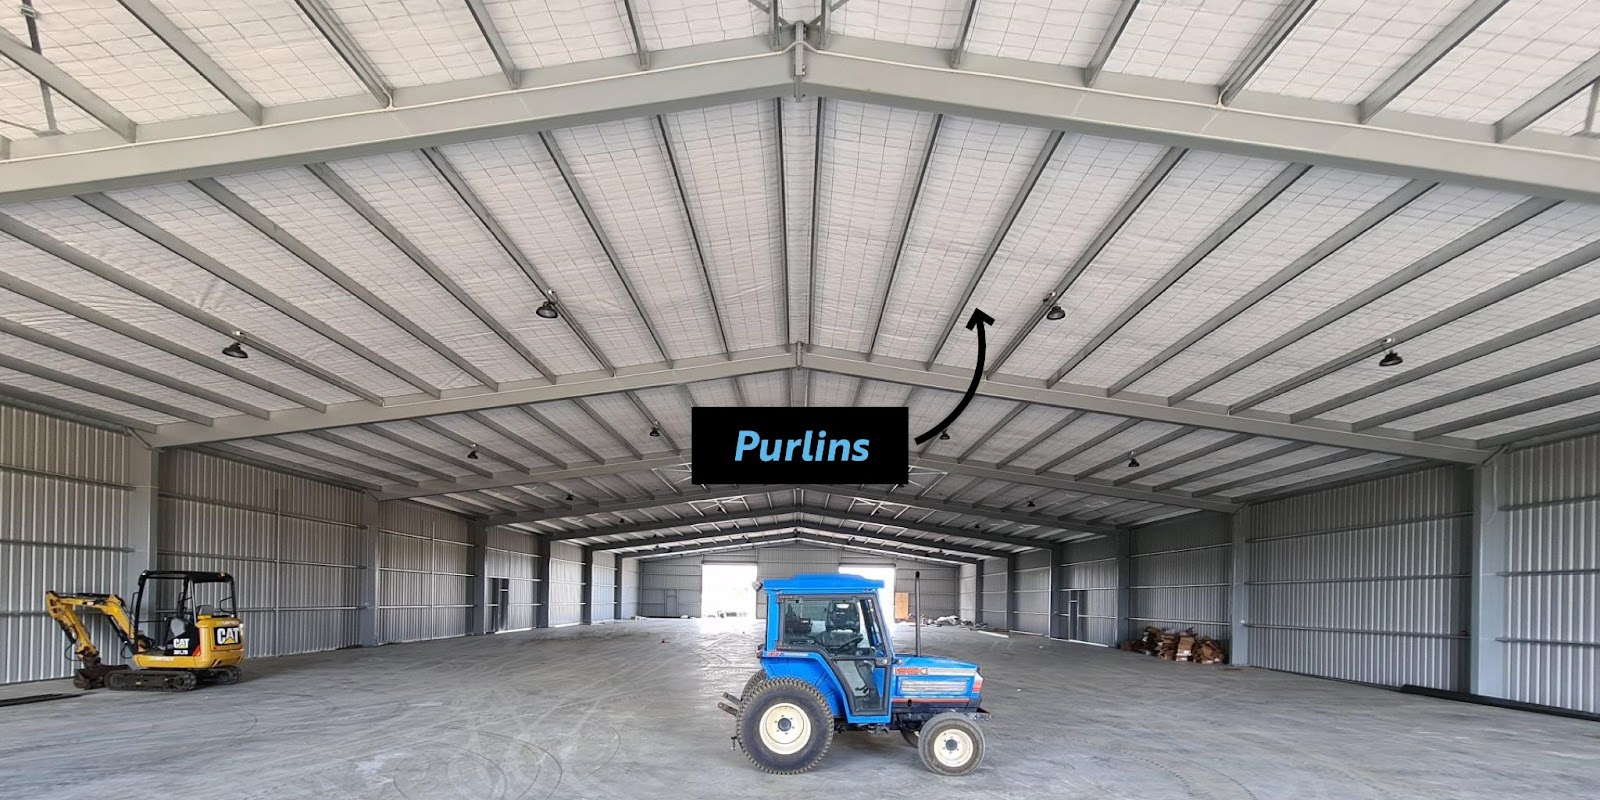 Different types of steel purlins